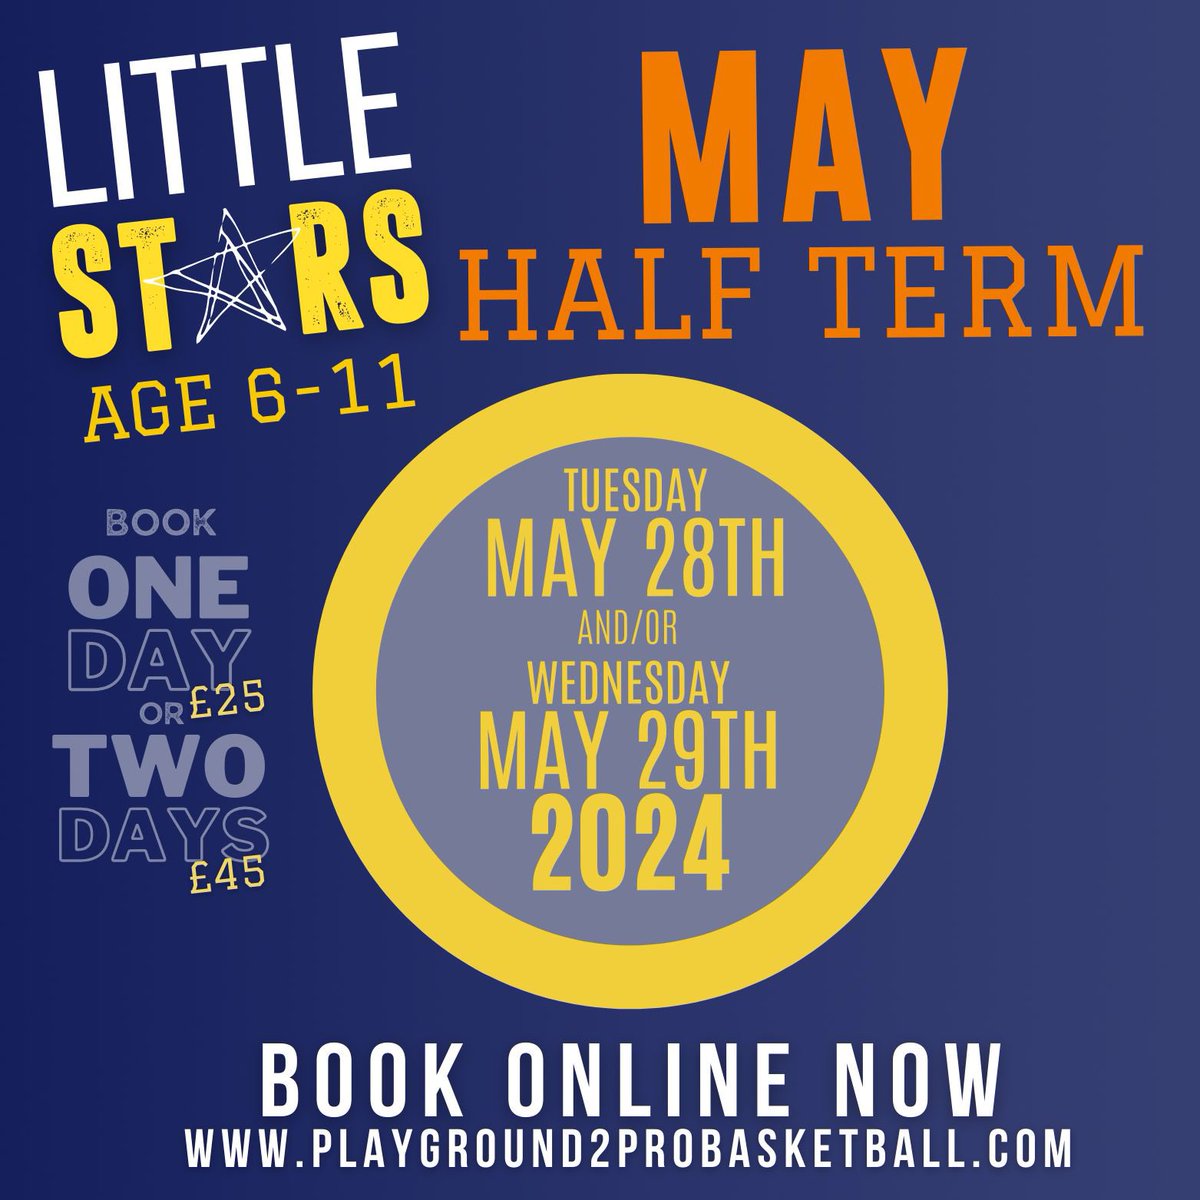 Booking now open for our holiday camps for May Half Term! Book via our website here: playground2probasketball.com/sessions-store… #TheFutureFactory